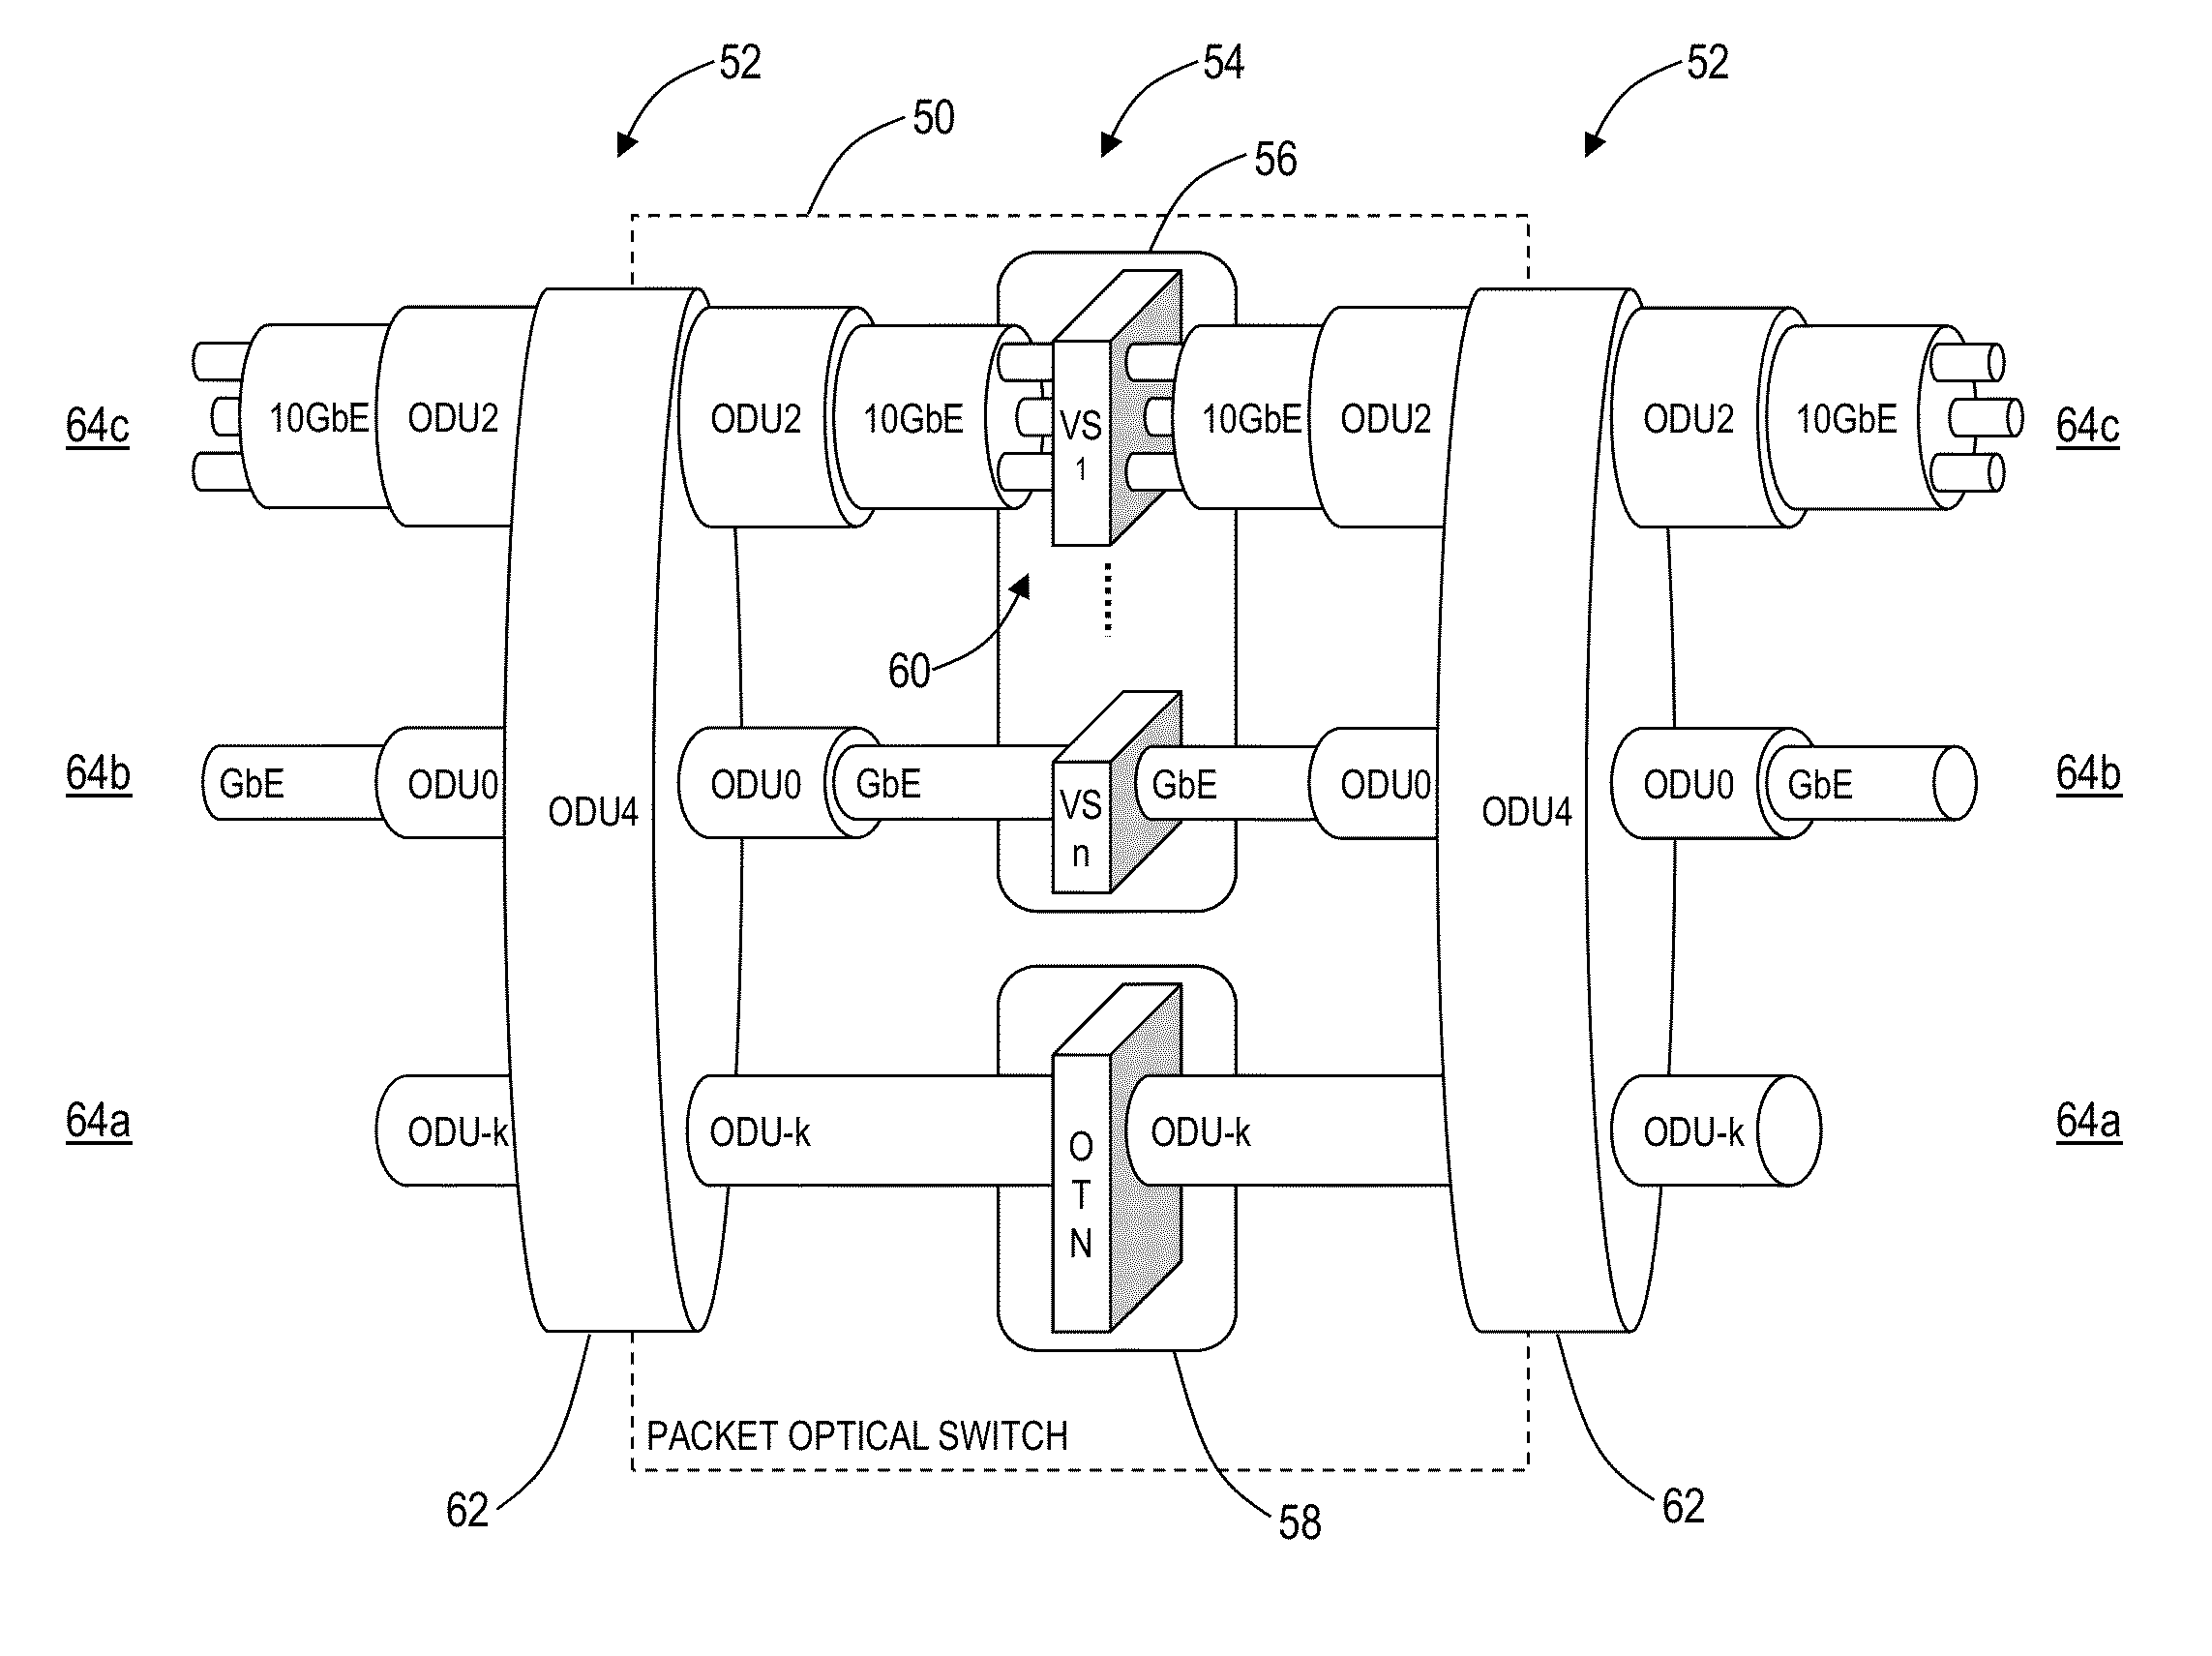 Ethernet private local area network systems and methods